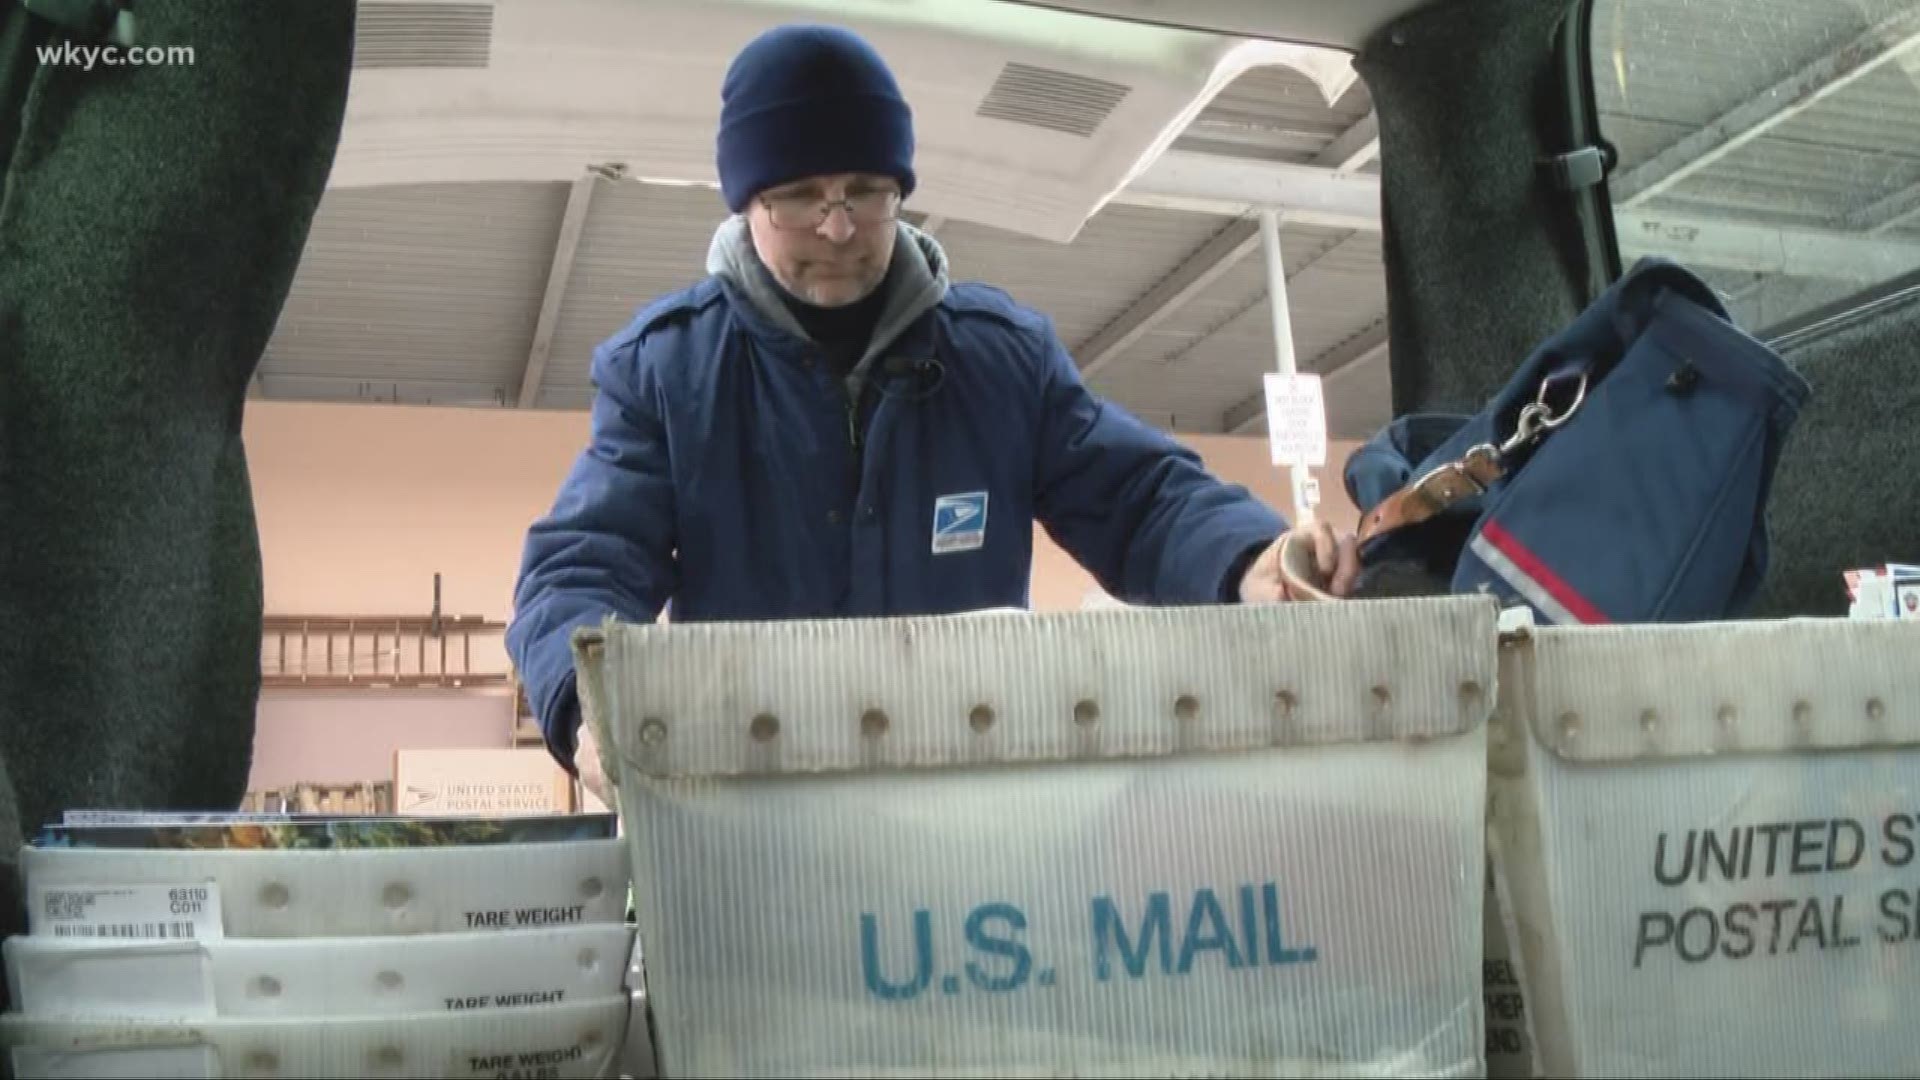 Jan. 30, 2019: The United States Postal Service has declared that its carriers will not deliver mail to several areas in Northeast Ohio today because of below-zero-temperatures. Areas with the following 3-digit zip code beginnings will not be serviced: 441,458, 452, 430-432.